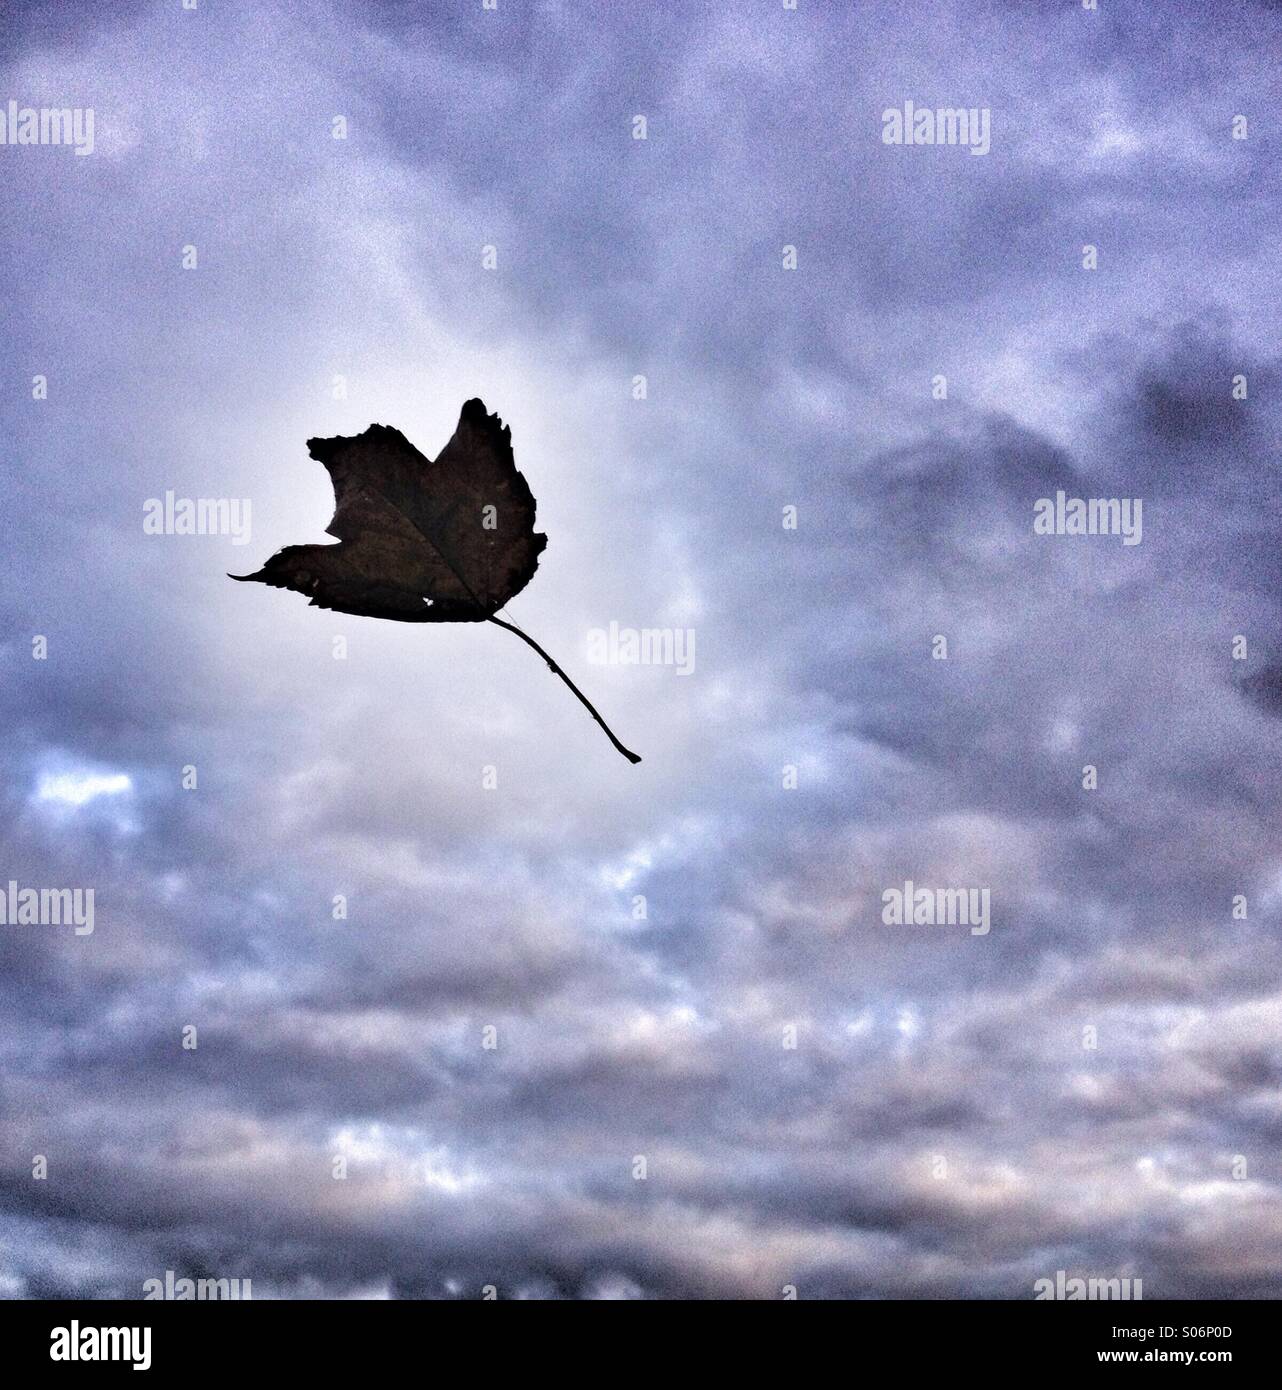 A falling leaf against the background of a dramatic, stormy sky Stock Photo